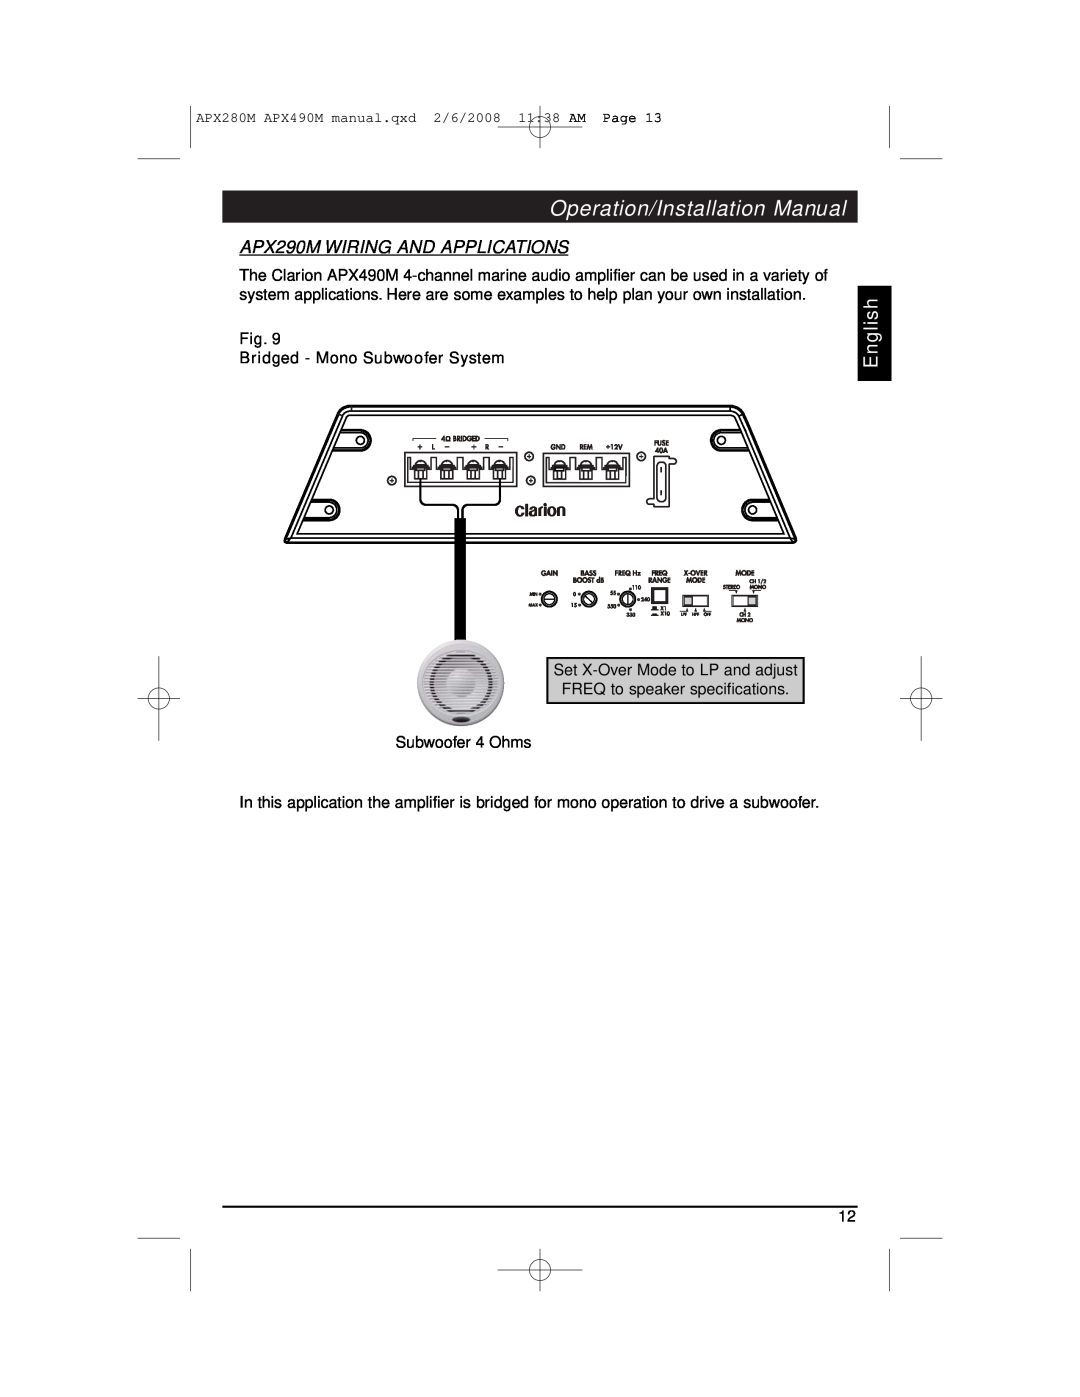 Clarion APX290M WIRING AND APPLICATIONS, Operation/Installation Manual, English, Fig. Bridged - Mono Subwoofer System 